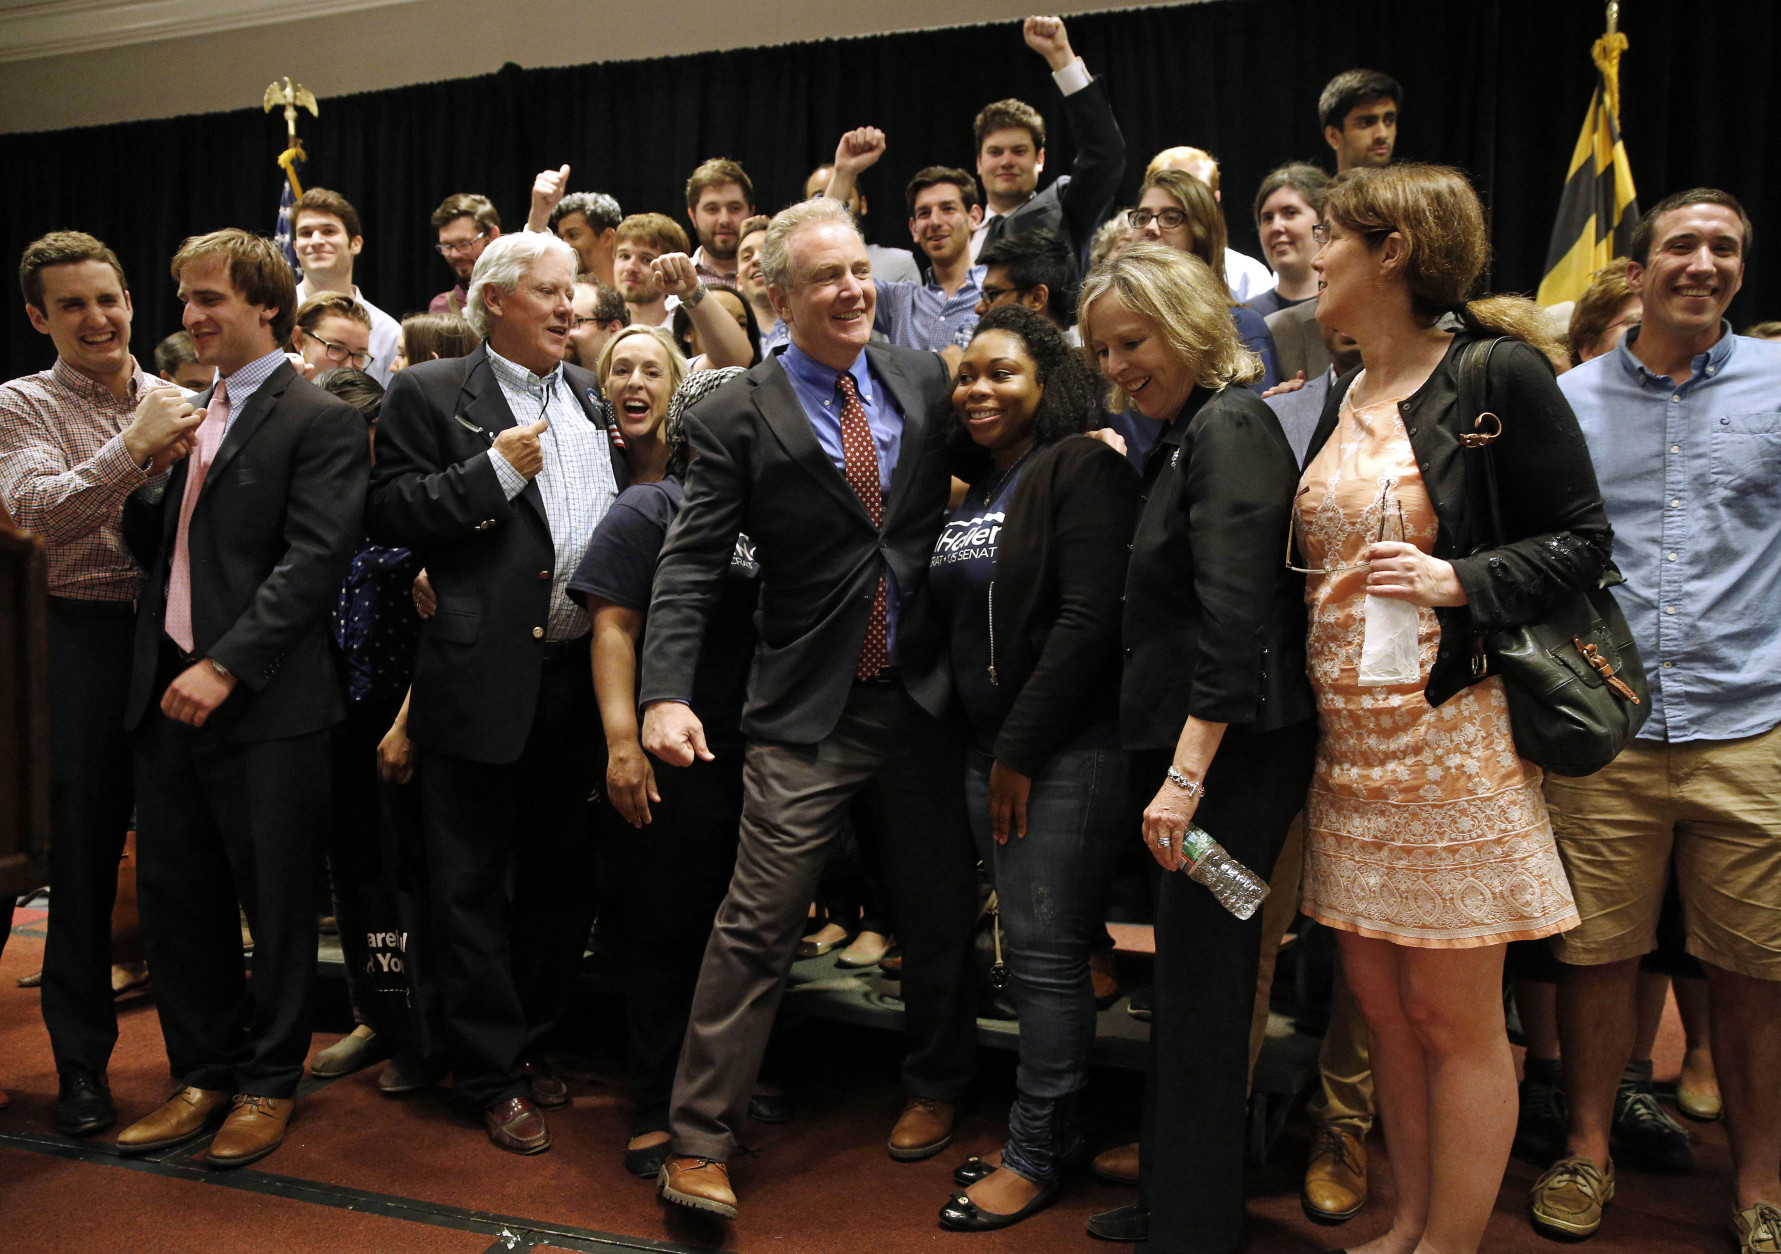 Democratic U.S. Senate candidate, Rep. Chris Van Hollen, D-Md., center, celebrates with campaign staff and volunteers after an election night party in Bethesda, Md., Tuesday, April 26, 2016. Van Hollen defeated Rep. Donna Edwards, D-Md., in the Democratic primary for U.S. Senate. (AP Photo/Patrick Semansky)